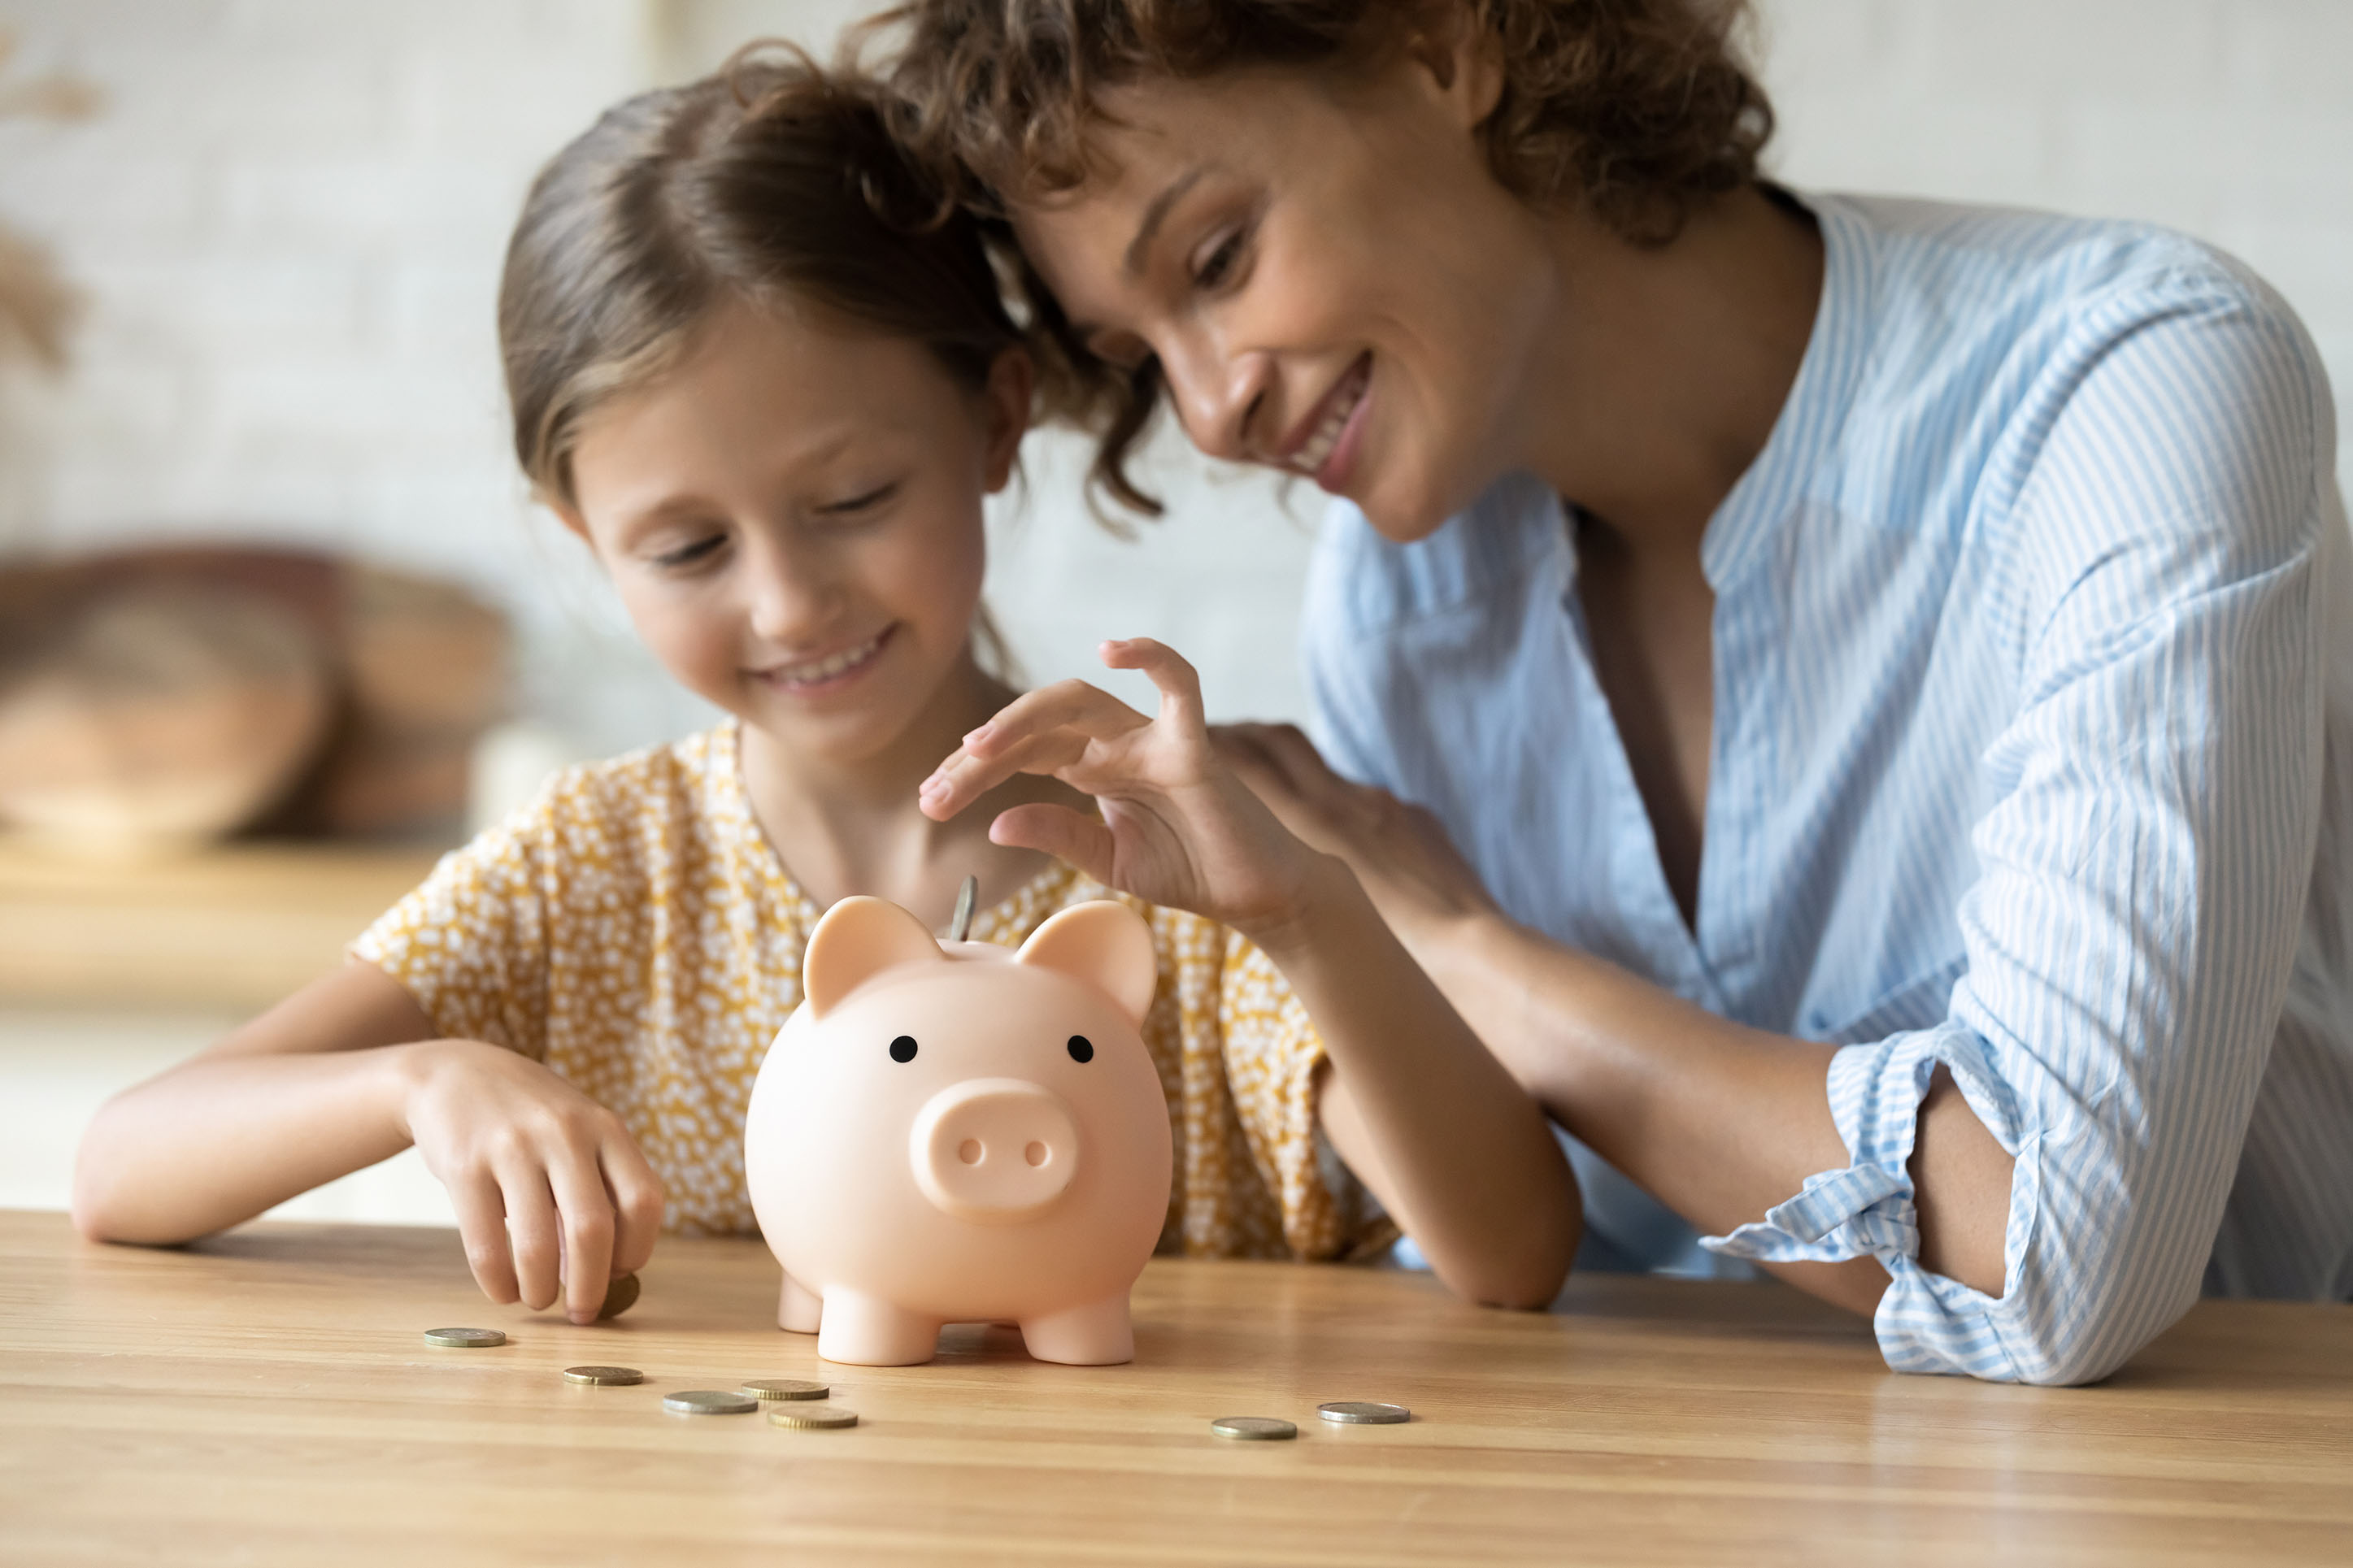 Mom and daughter putting money into a piggy bank. 